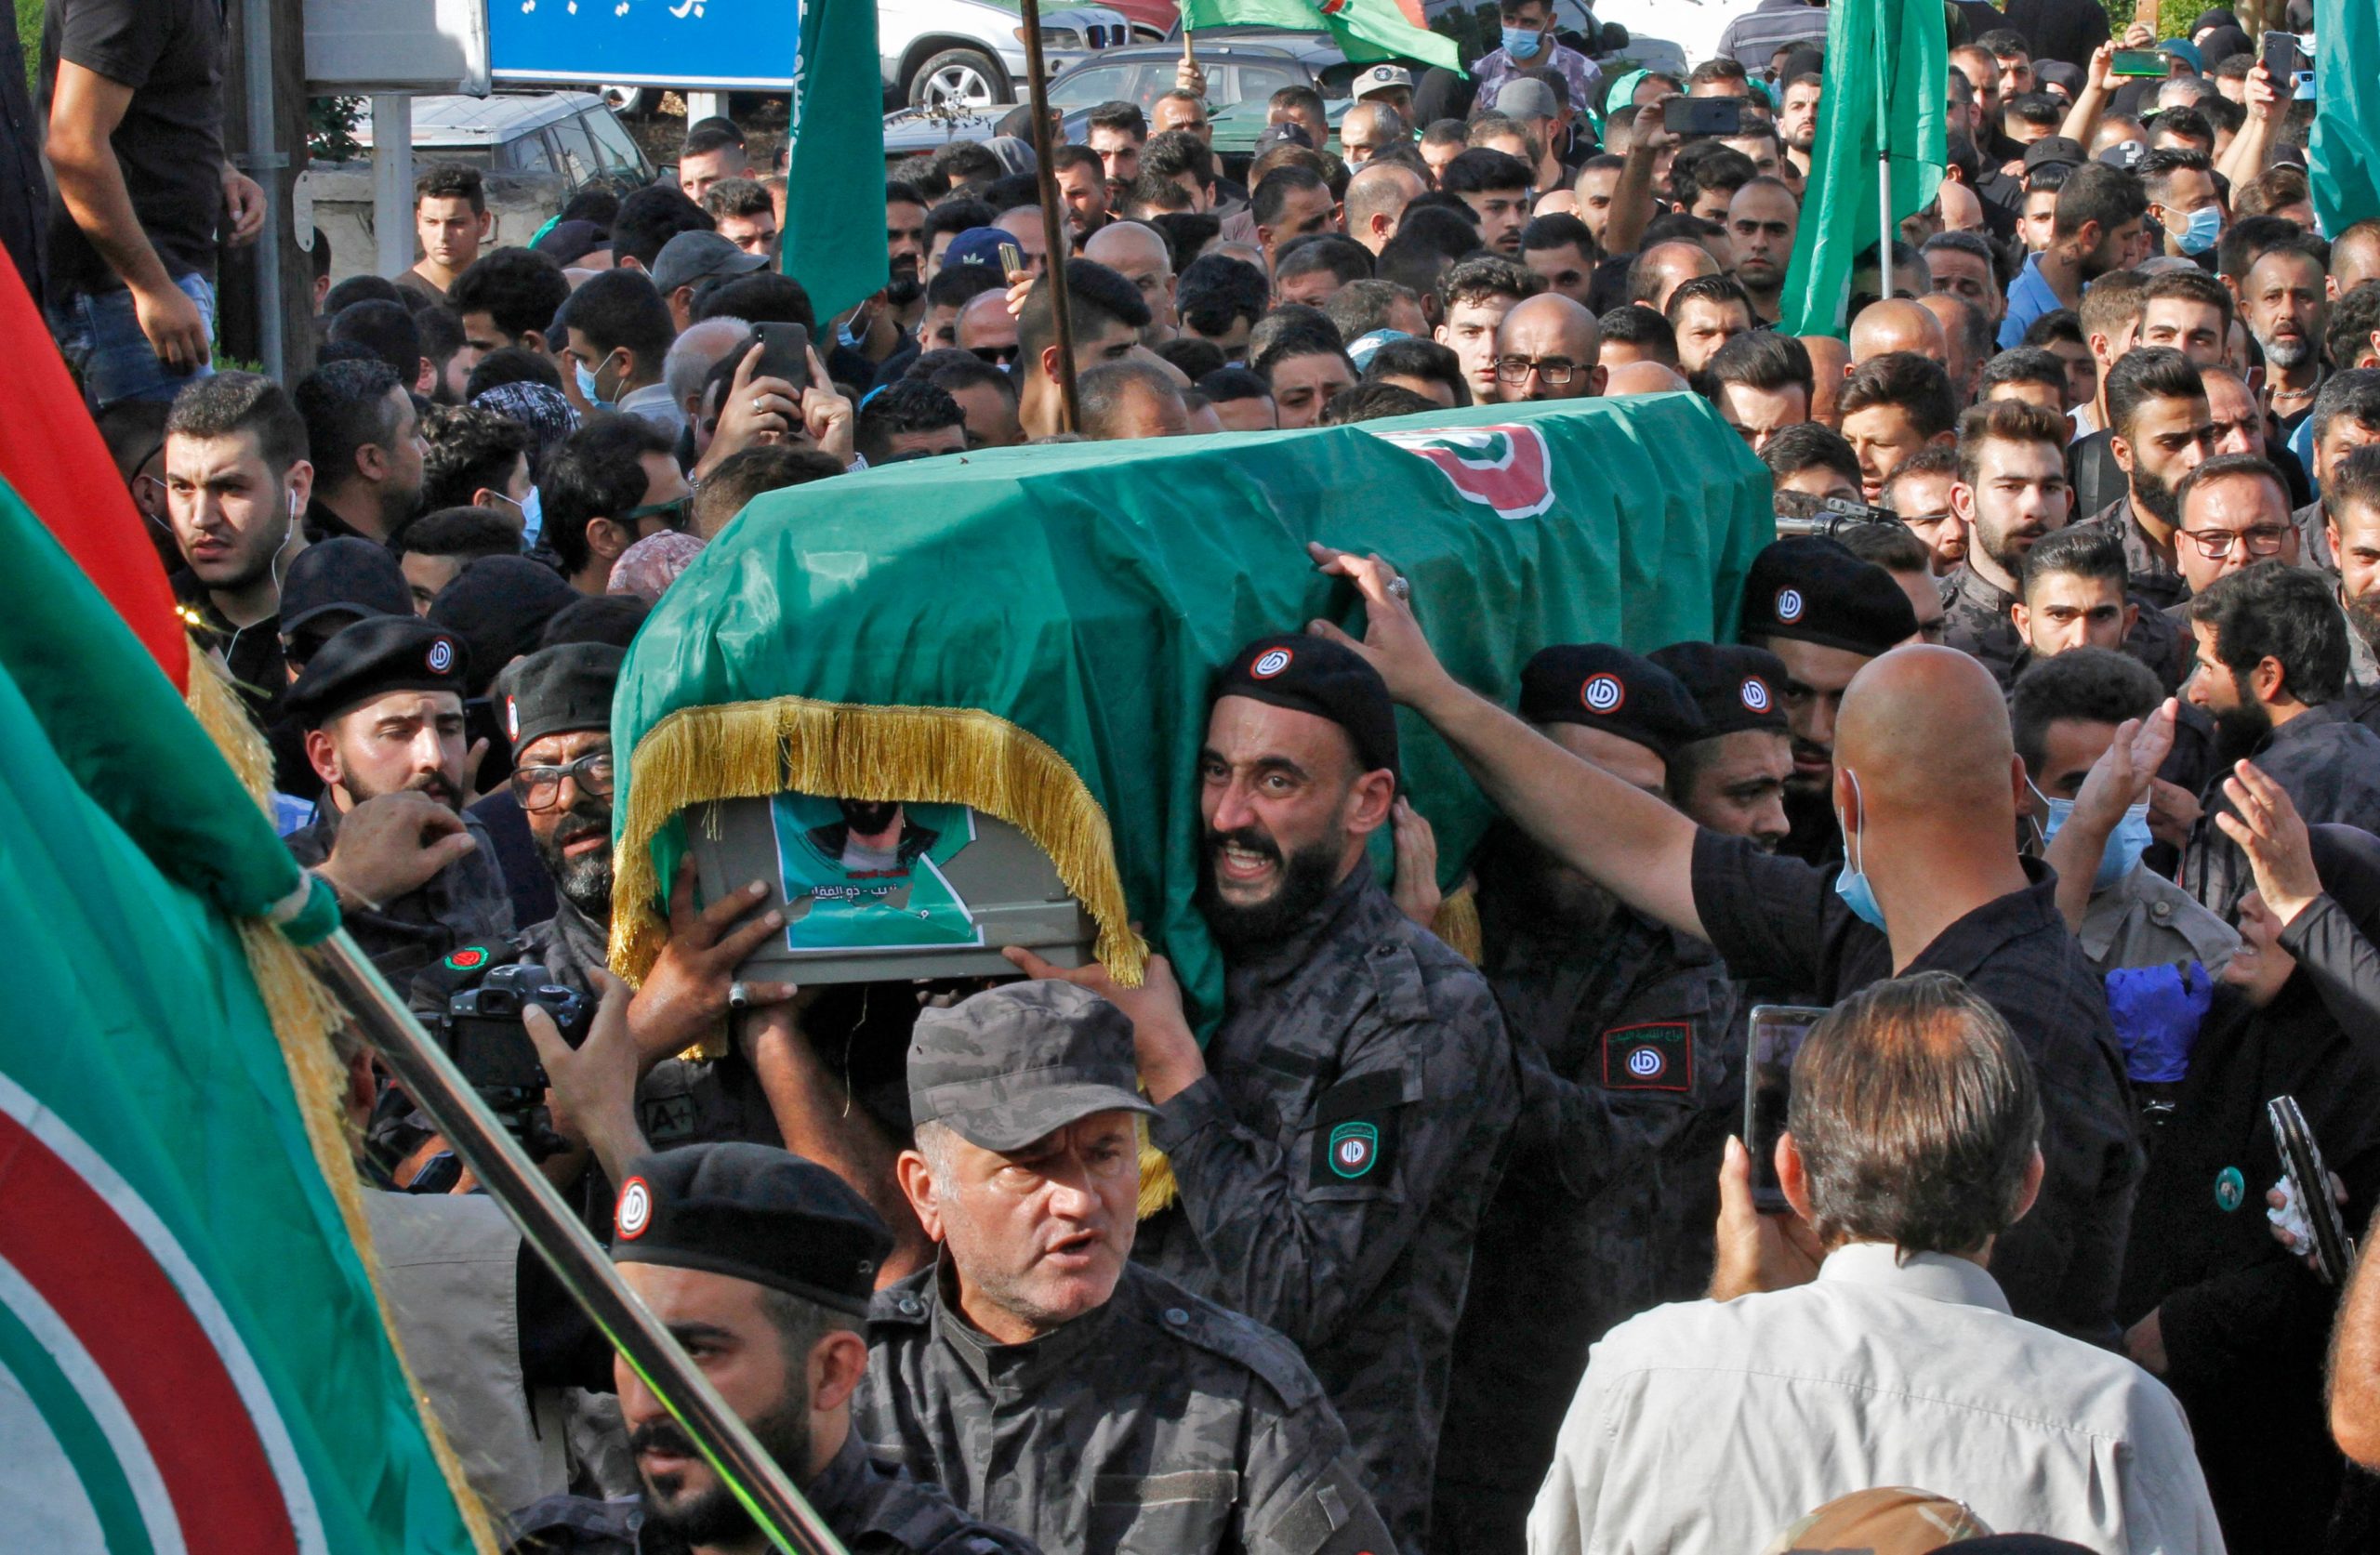 Members of the Shiite Amal movement carry the flag-draped casket of a fellow fighter who was killed in clashes in the Tayouneh neighbourhood of the capital Beirut's southern suburbs a day earlier, during his funeral in the southern Lebanese town of Al-Numairiyah, on October 15, 2021. (Photo by MAHMOUD ZAYYAT/AFP via Getty Images)